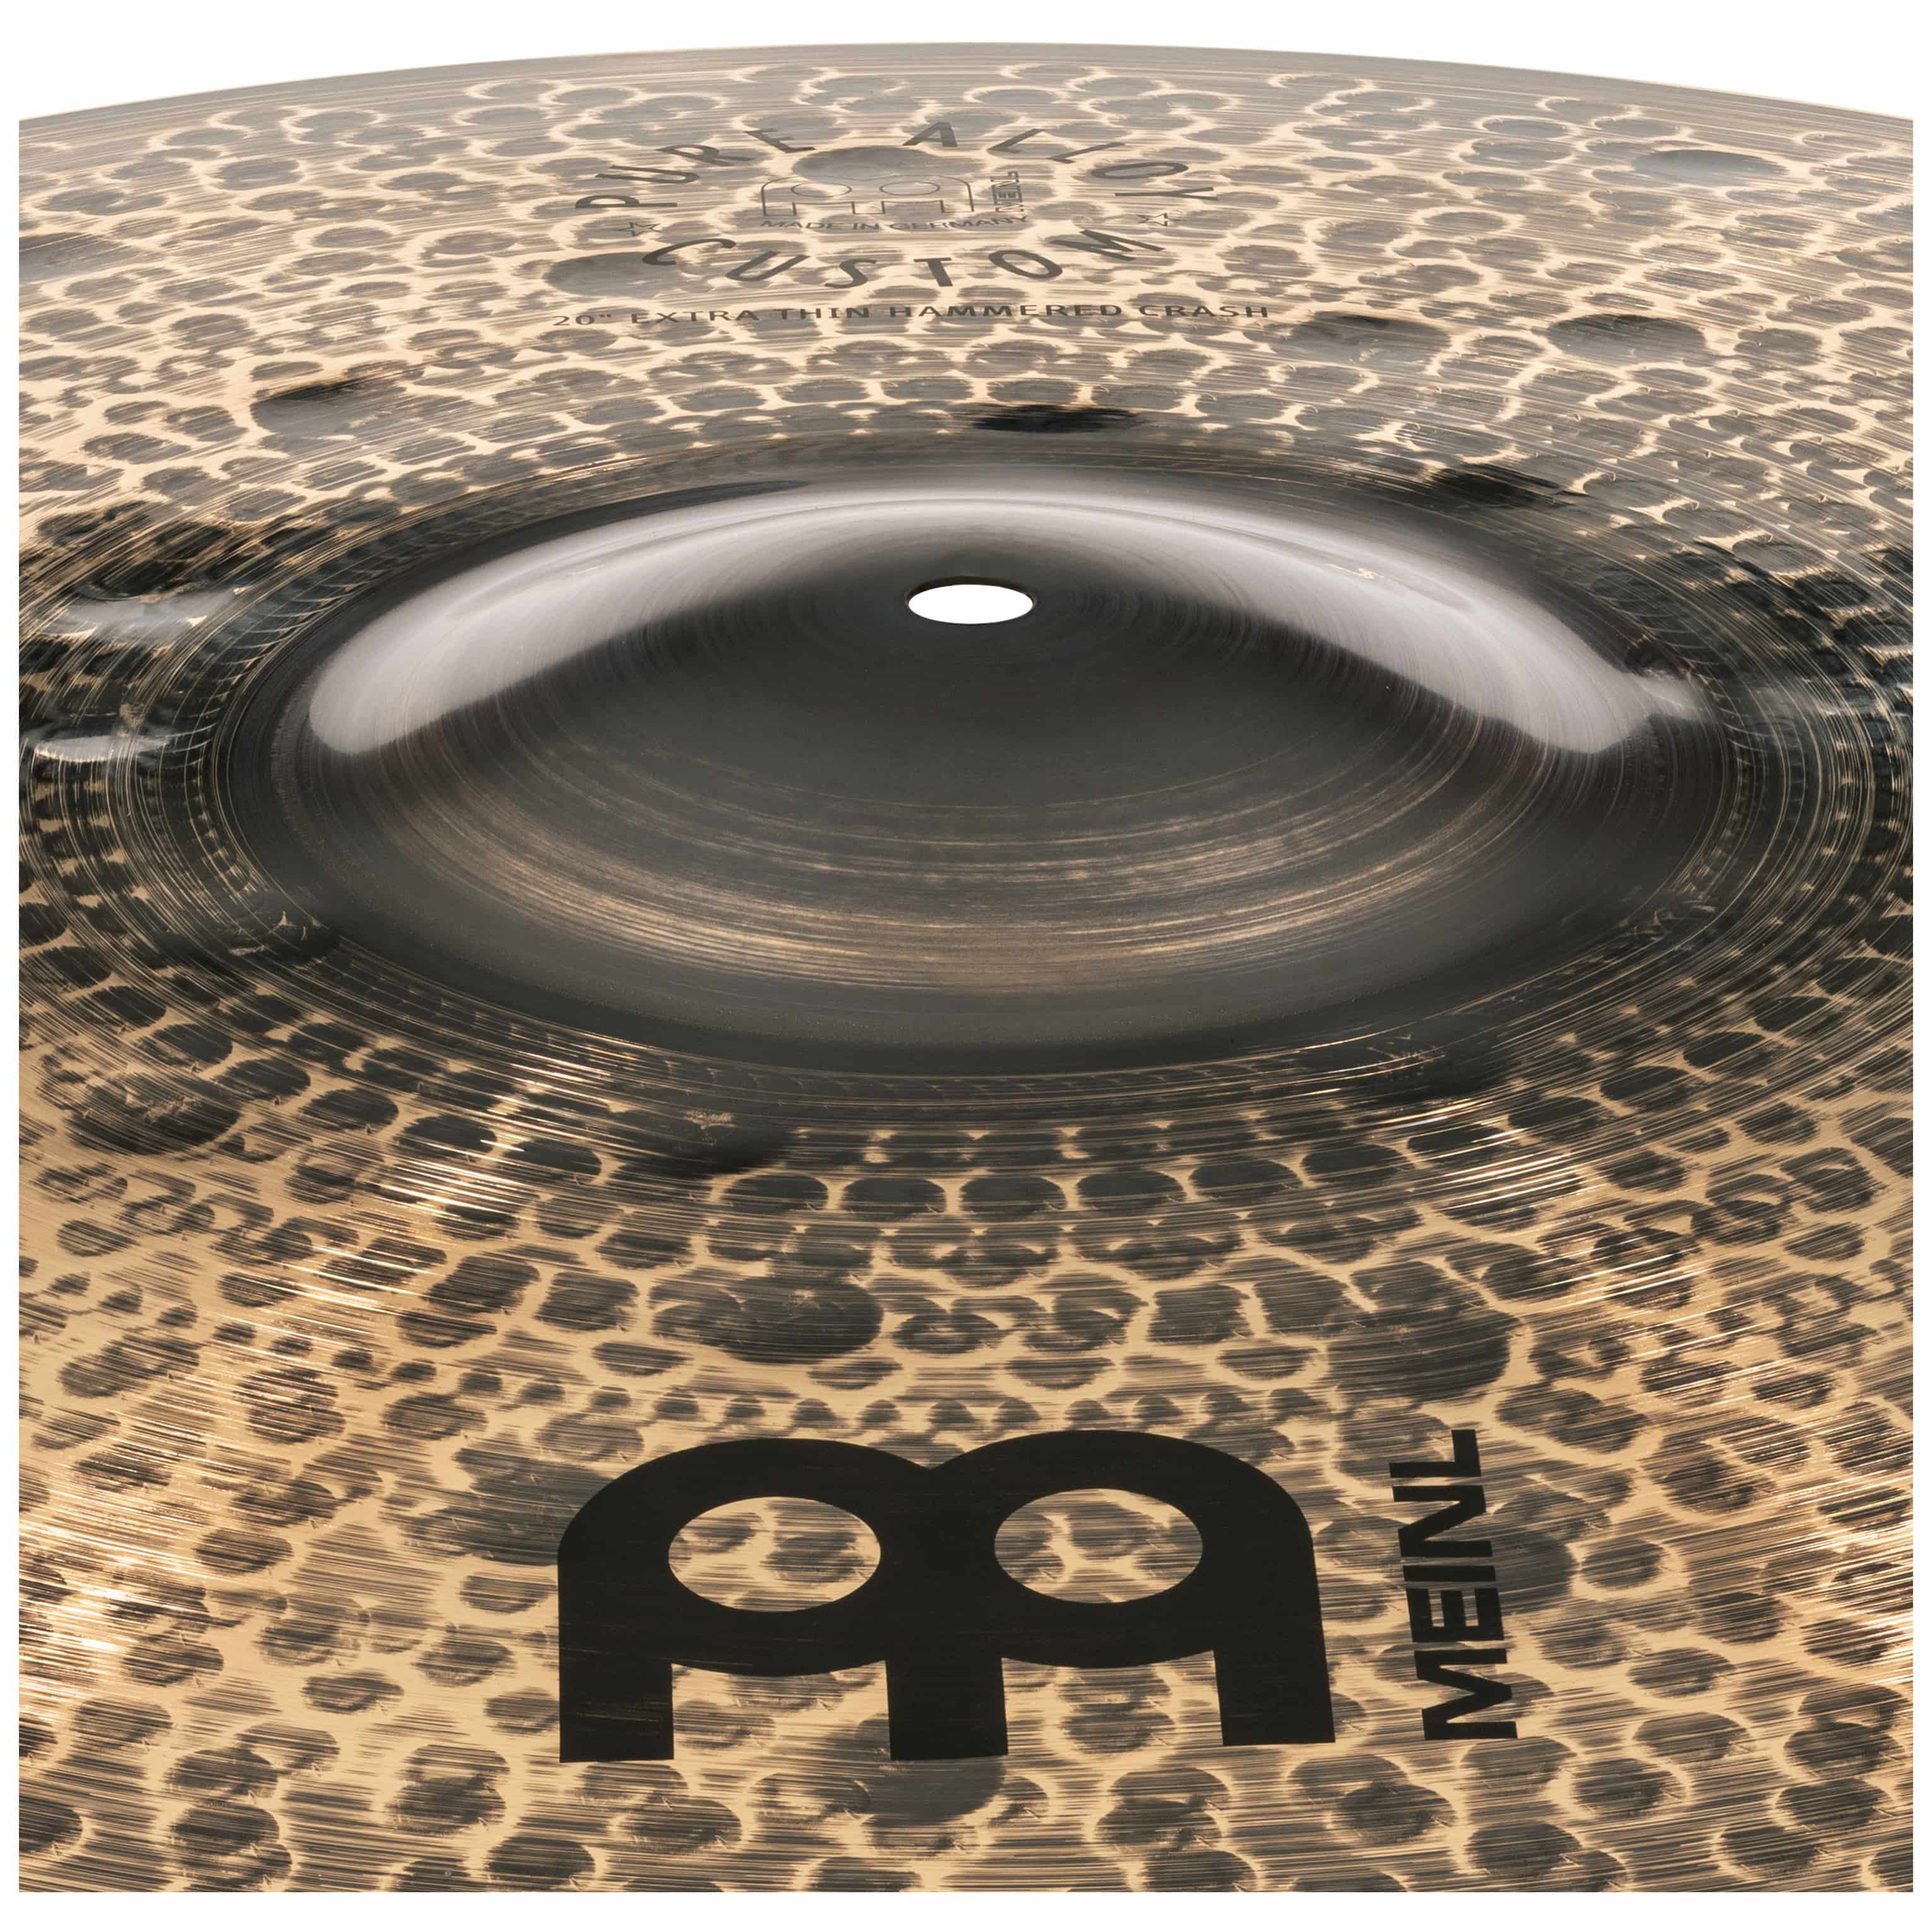 Meinl Cymbals PAC20ETHC - 20" Pure Alloy Custom Extra Thin Hammered Crash 4